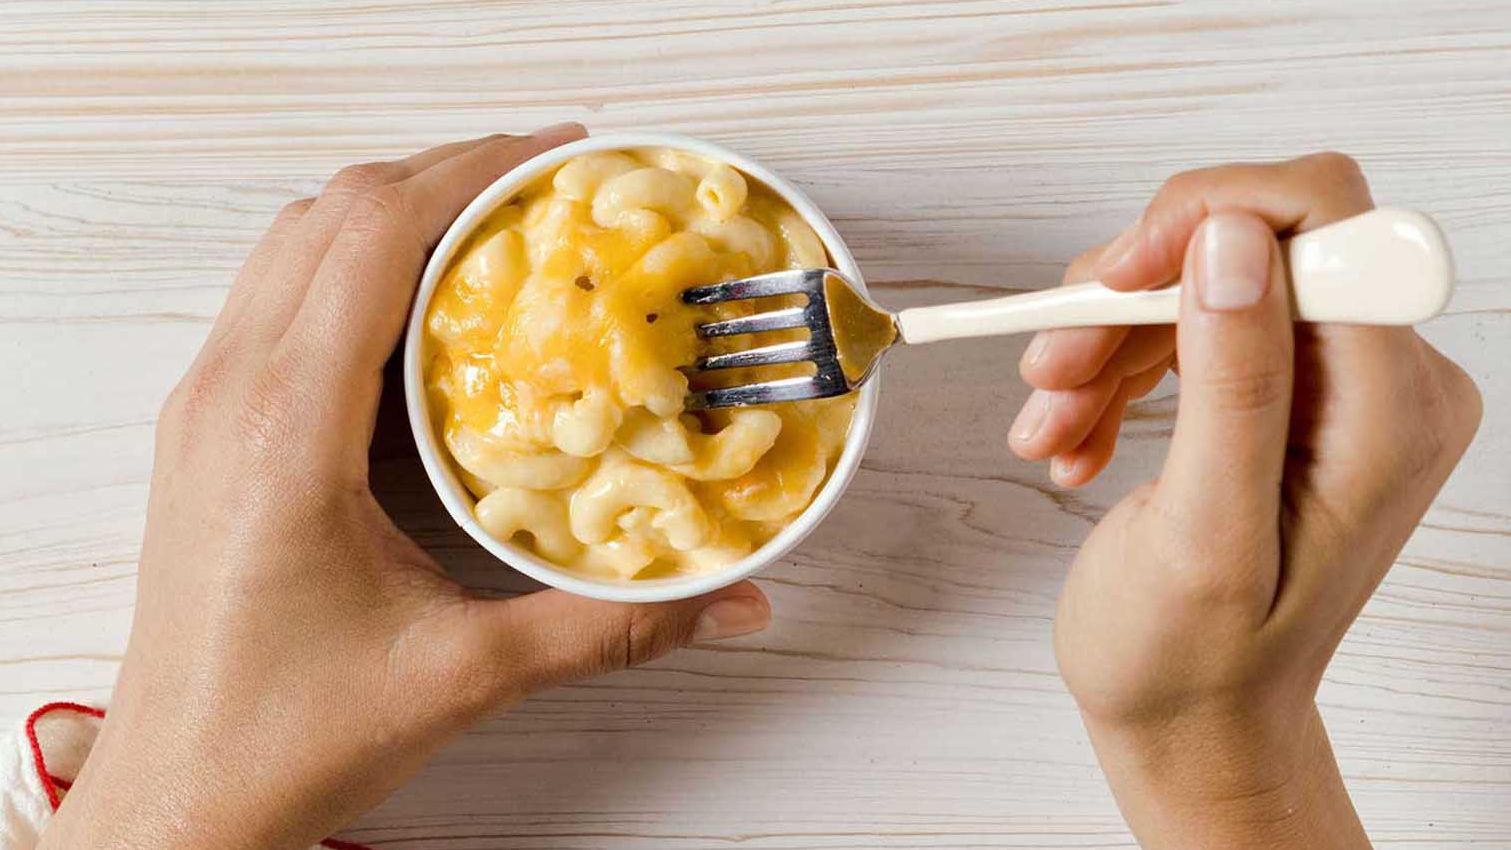 Mac & Cheese is the first permanent side addition to the menu since 2016.